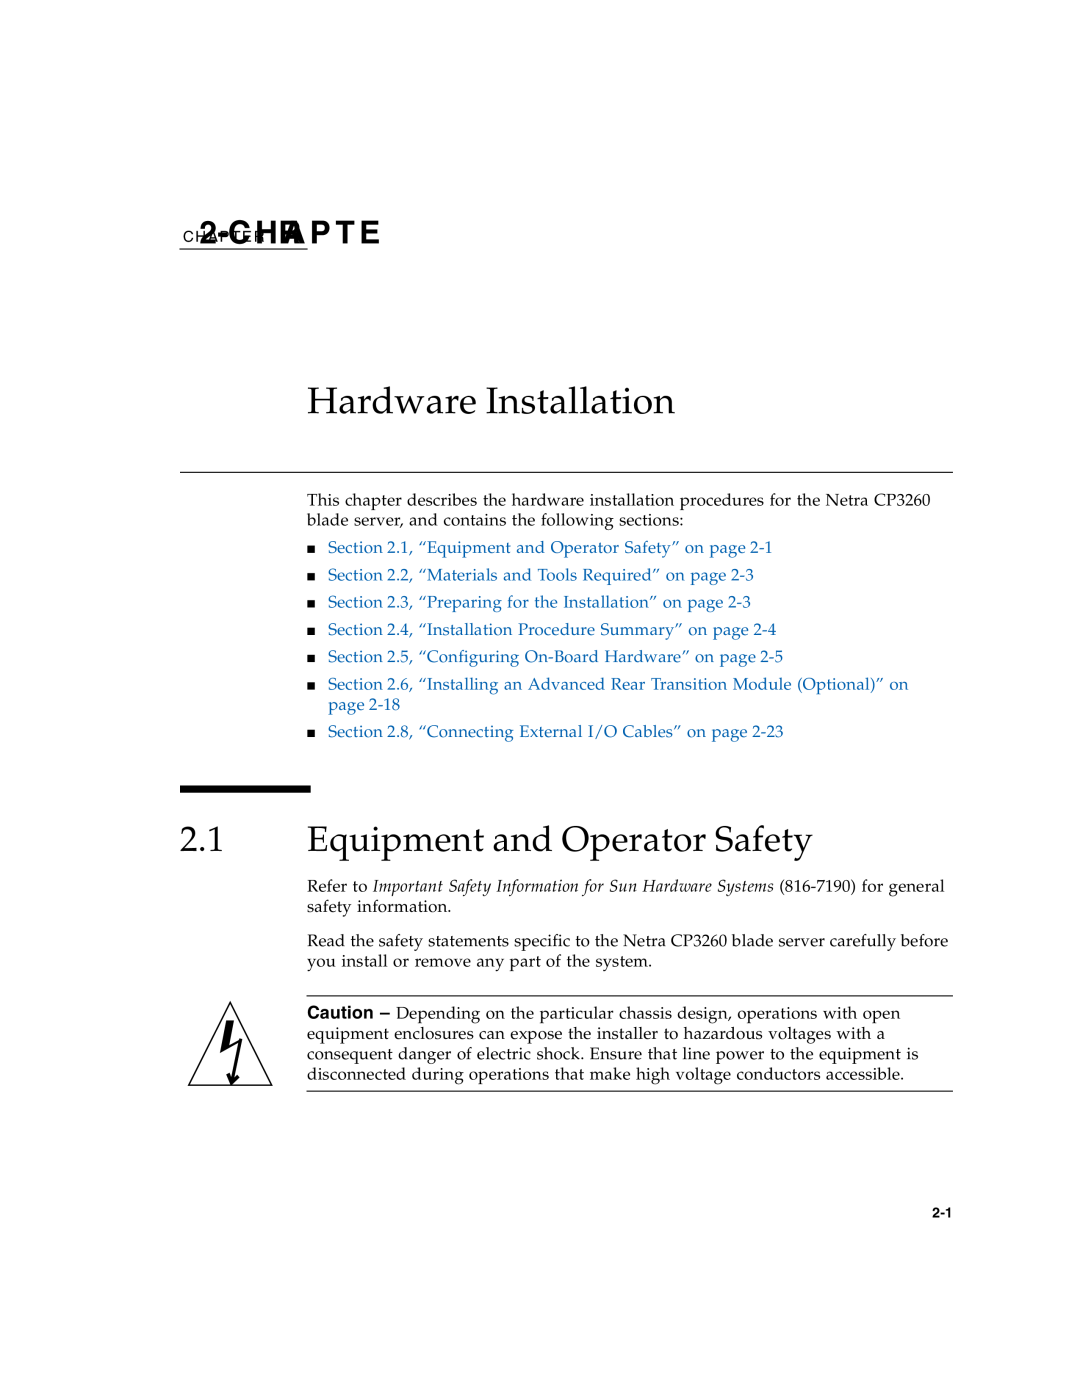 Sun Microsystems CP3260 manual Hardware Installation, Equipment and Operator Safety, C H2A-PCT E RHRA P T E 